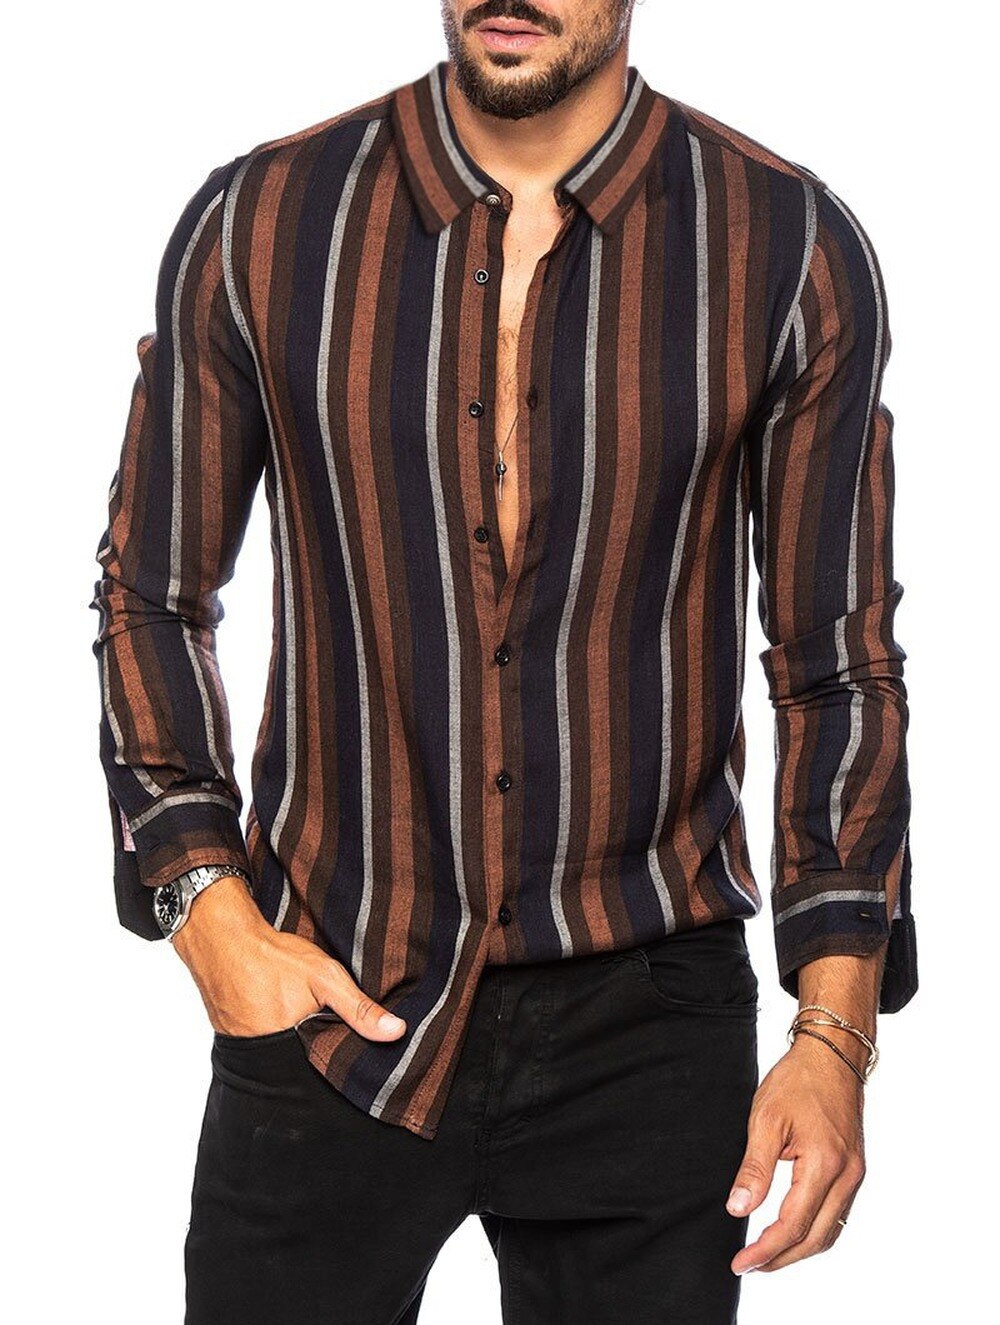 Gbolsos Spring and summer new men's striped shirt Slim multi-color lapel men's casual long-sleeved shirt youth men's clothing